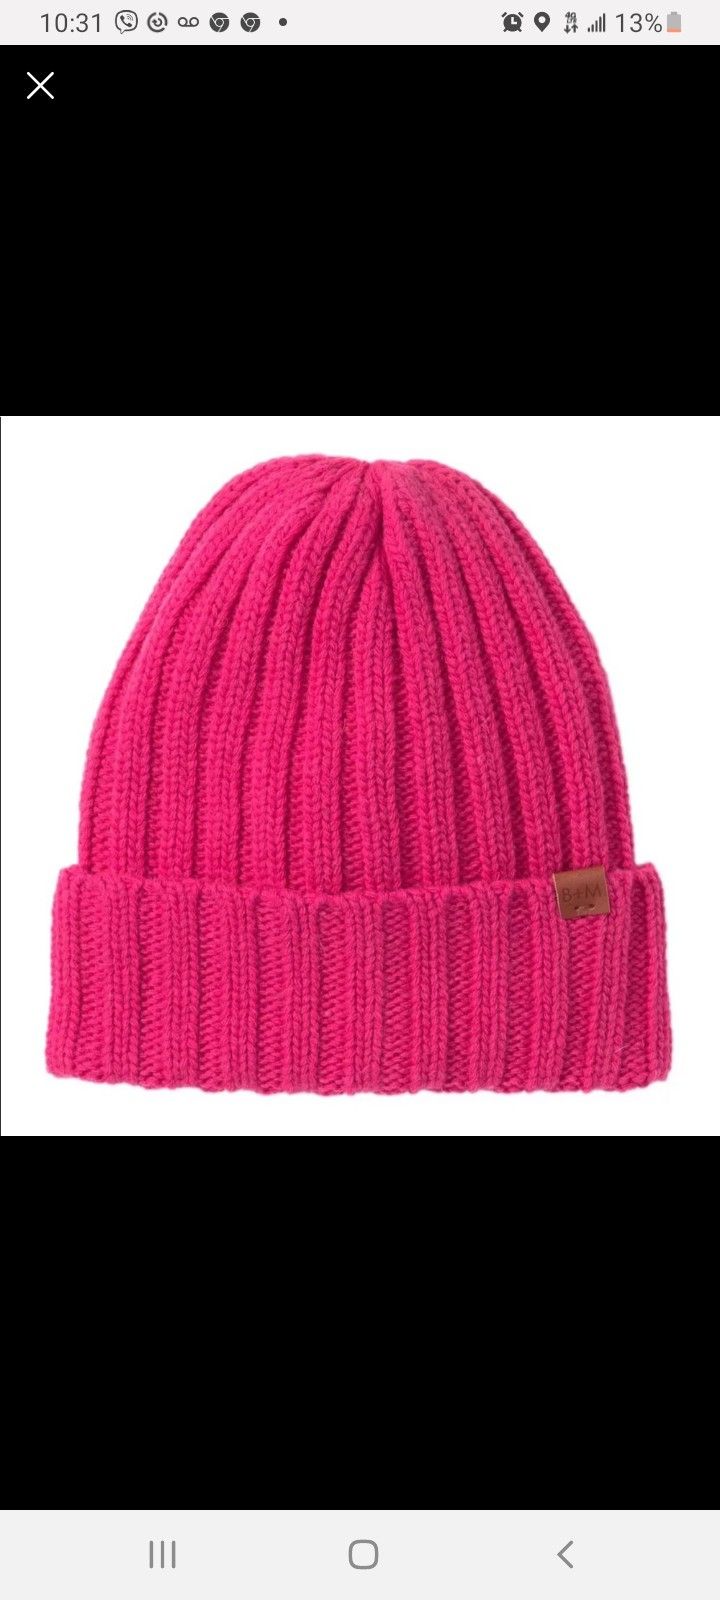 Bickley and Mitchell Amsterdam Beanie Wool Hat Nordstrom pink NEW